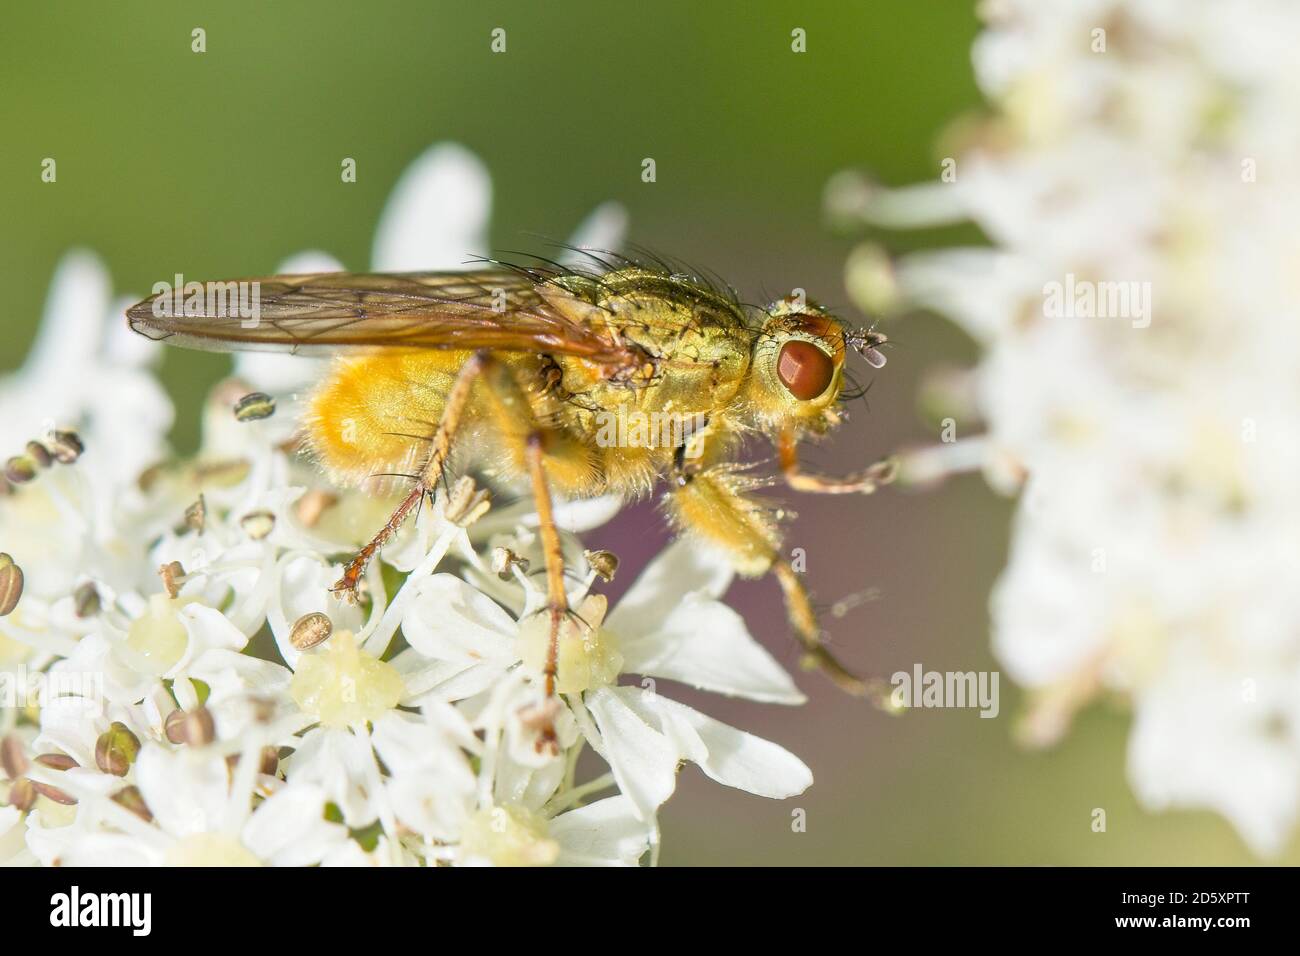 Fly species on a flowerhead, Cornwall, England, UK. Stock Photo